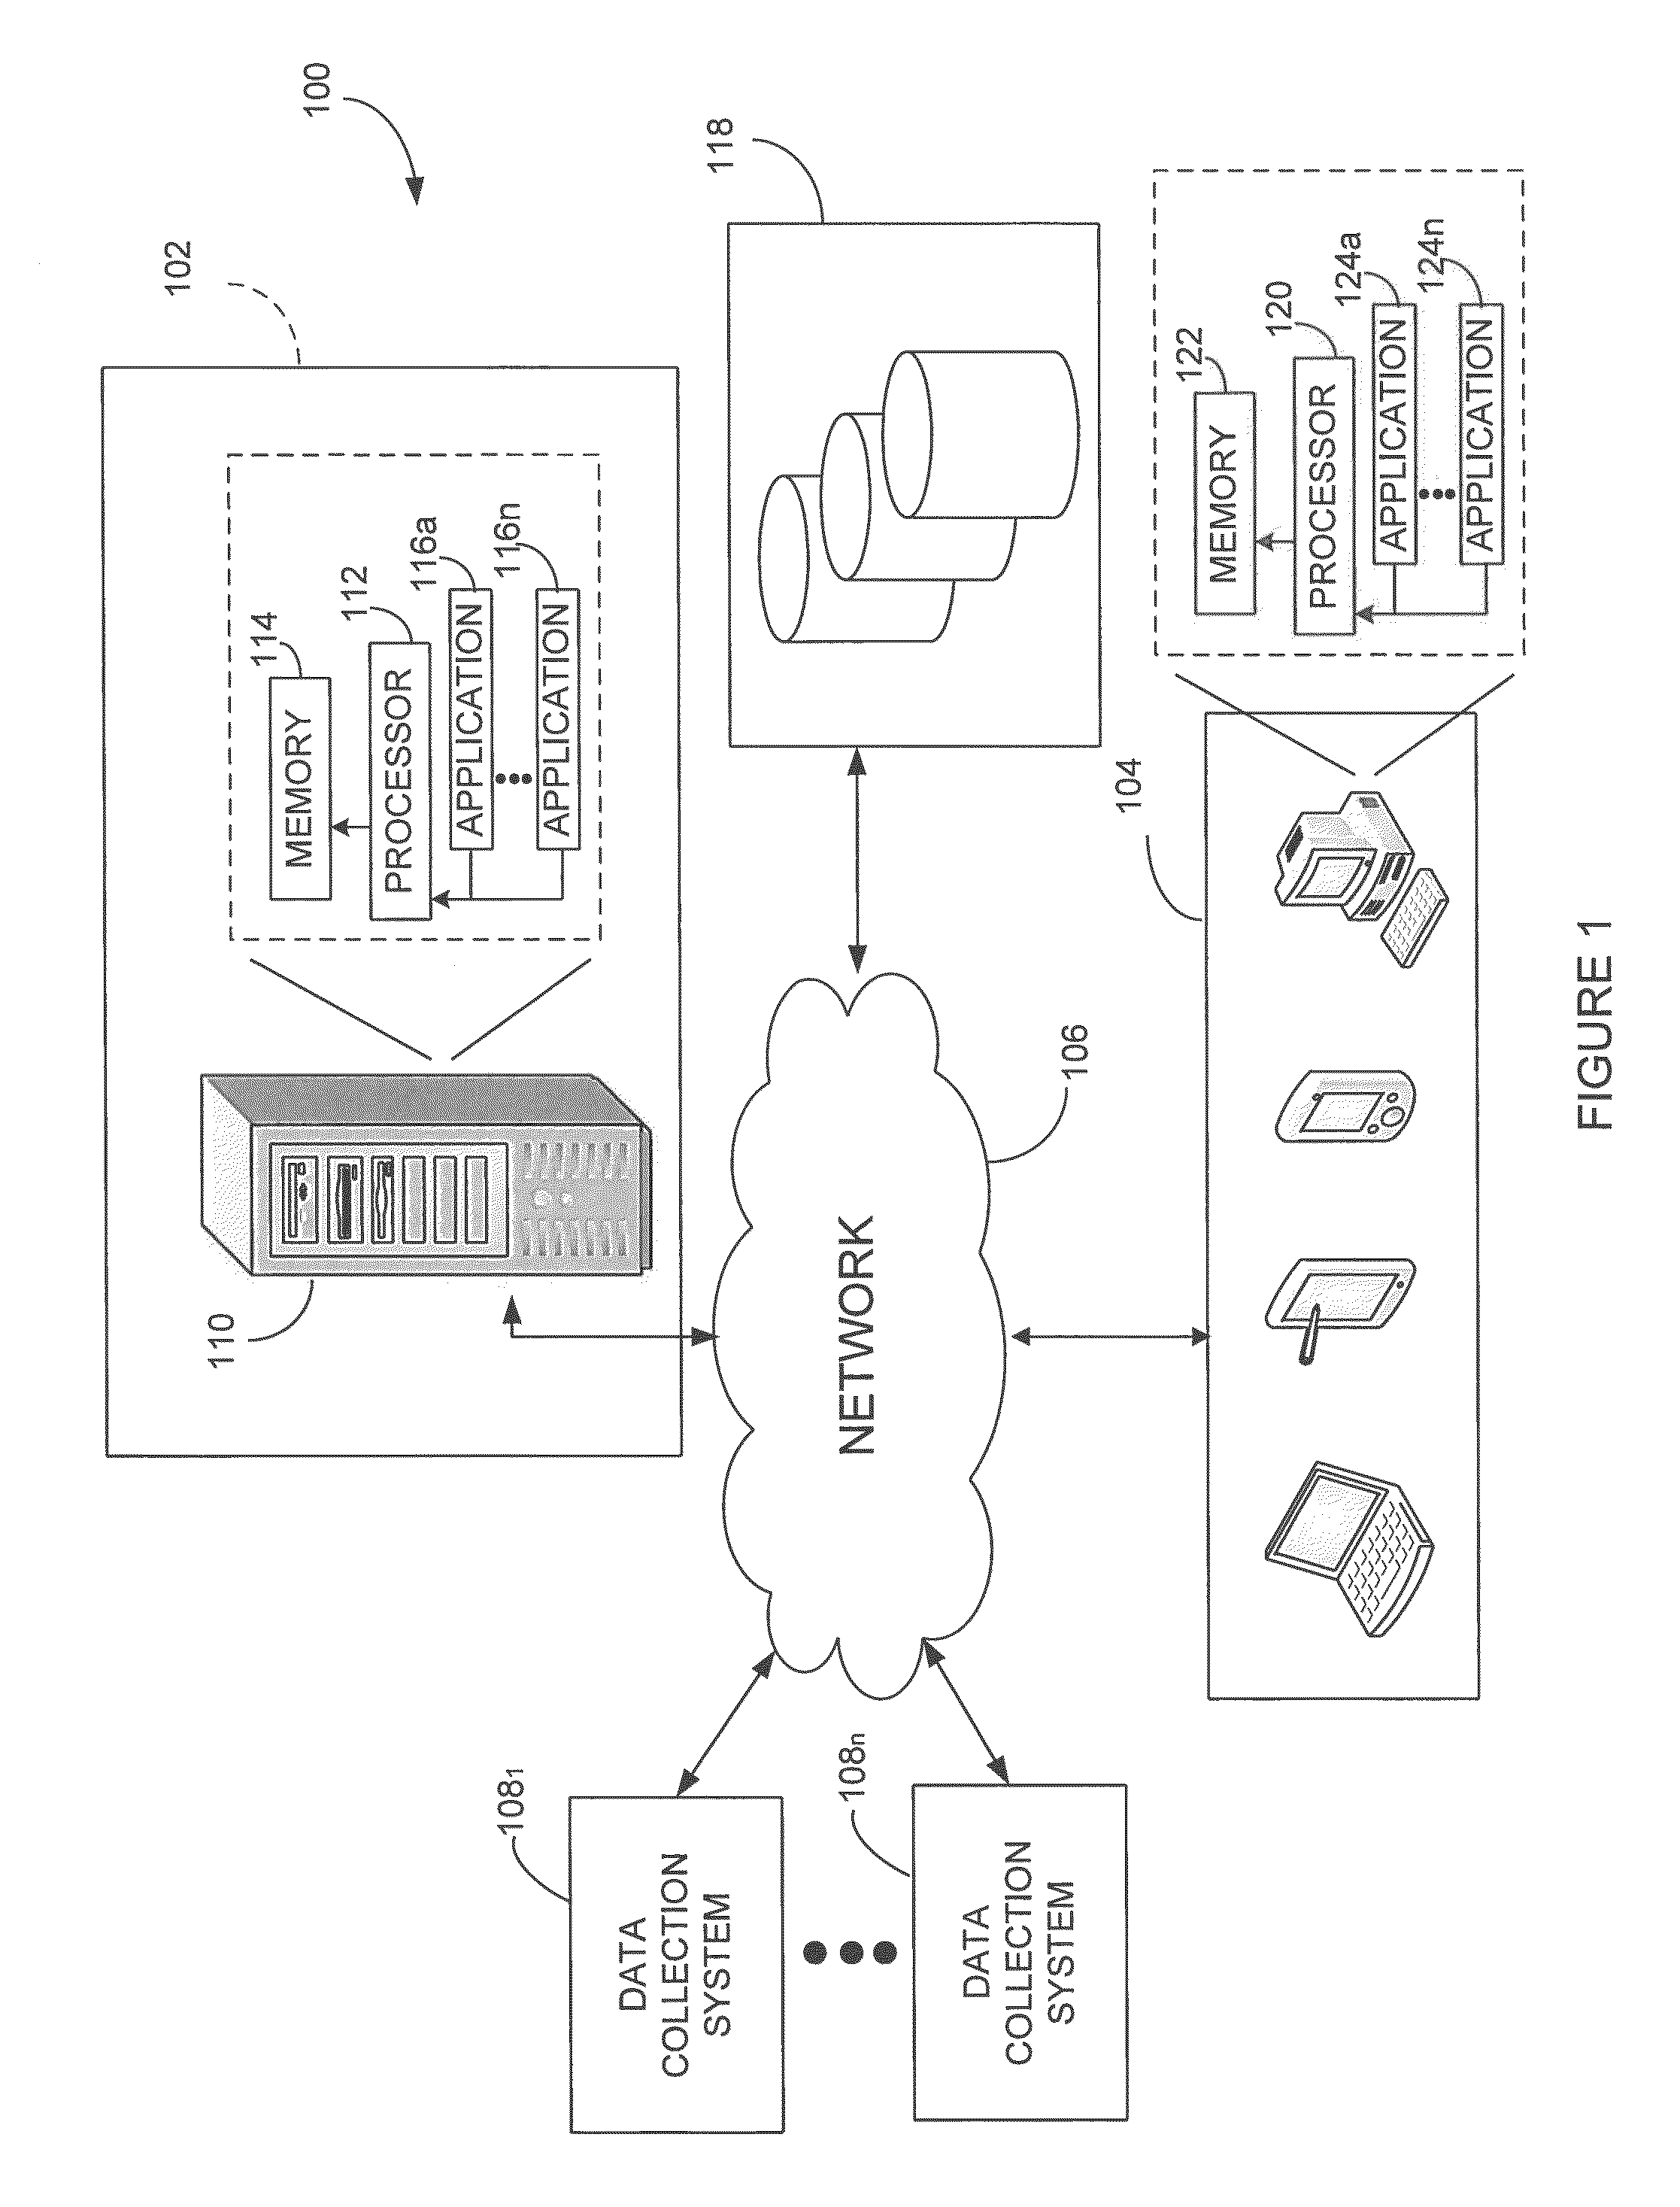 System and method for thermal response testing